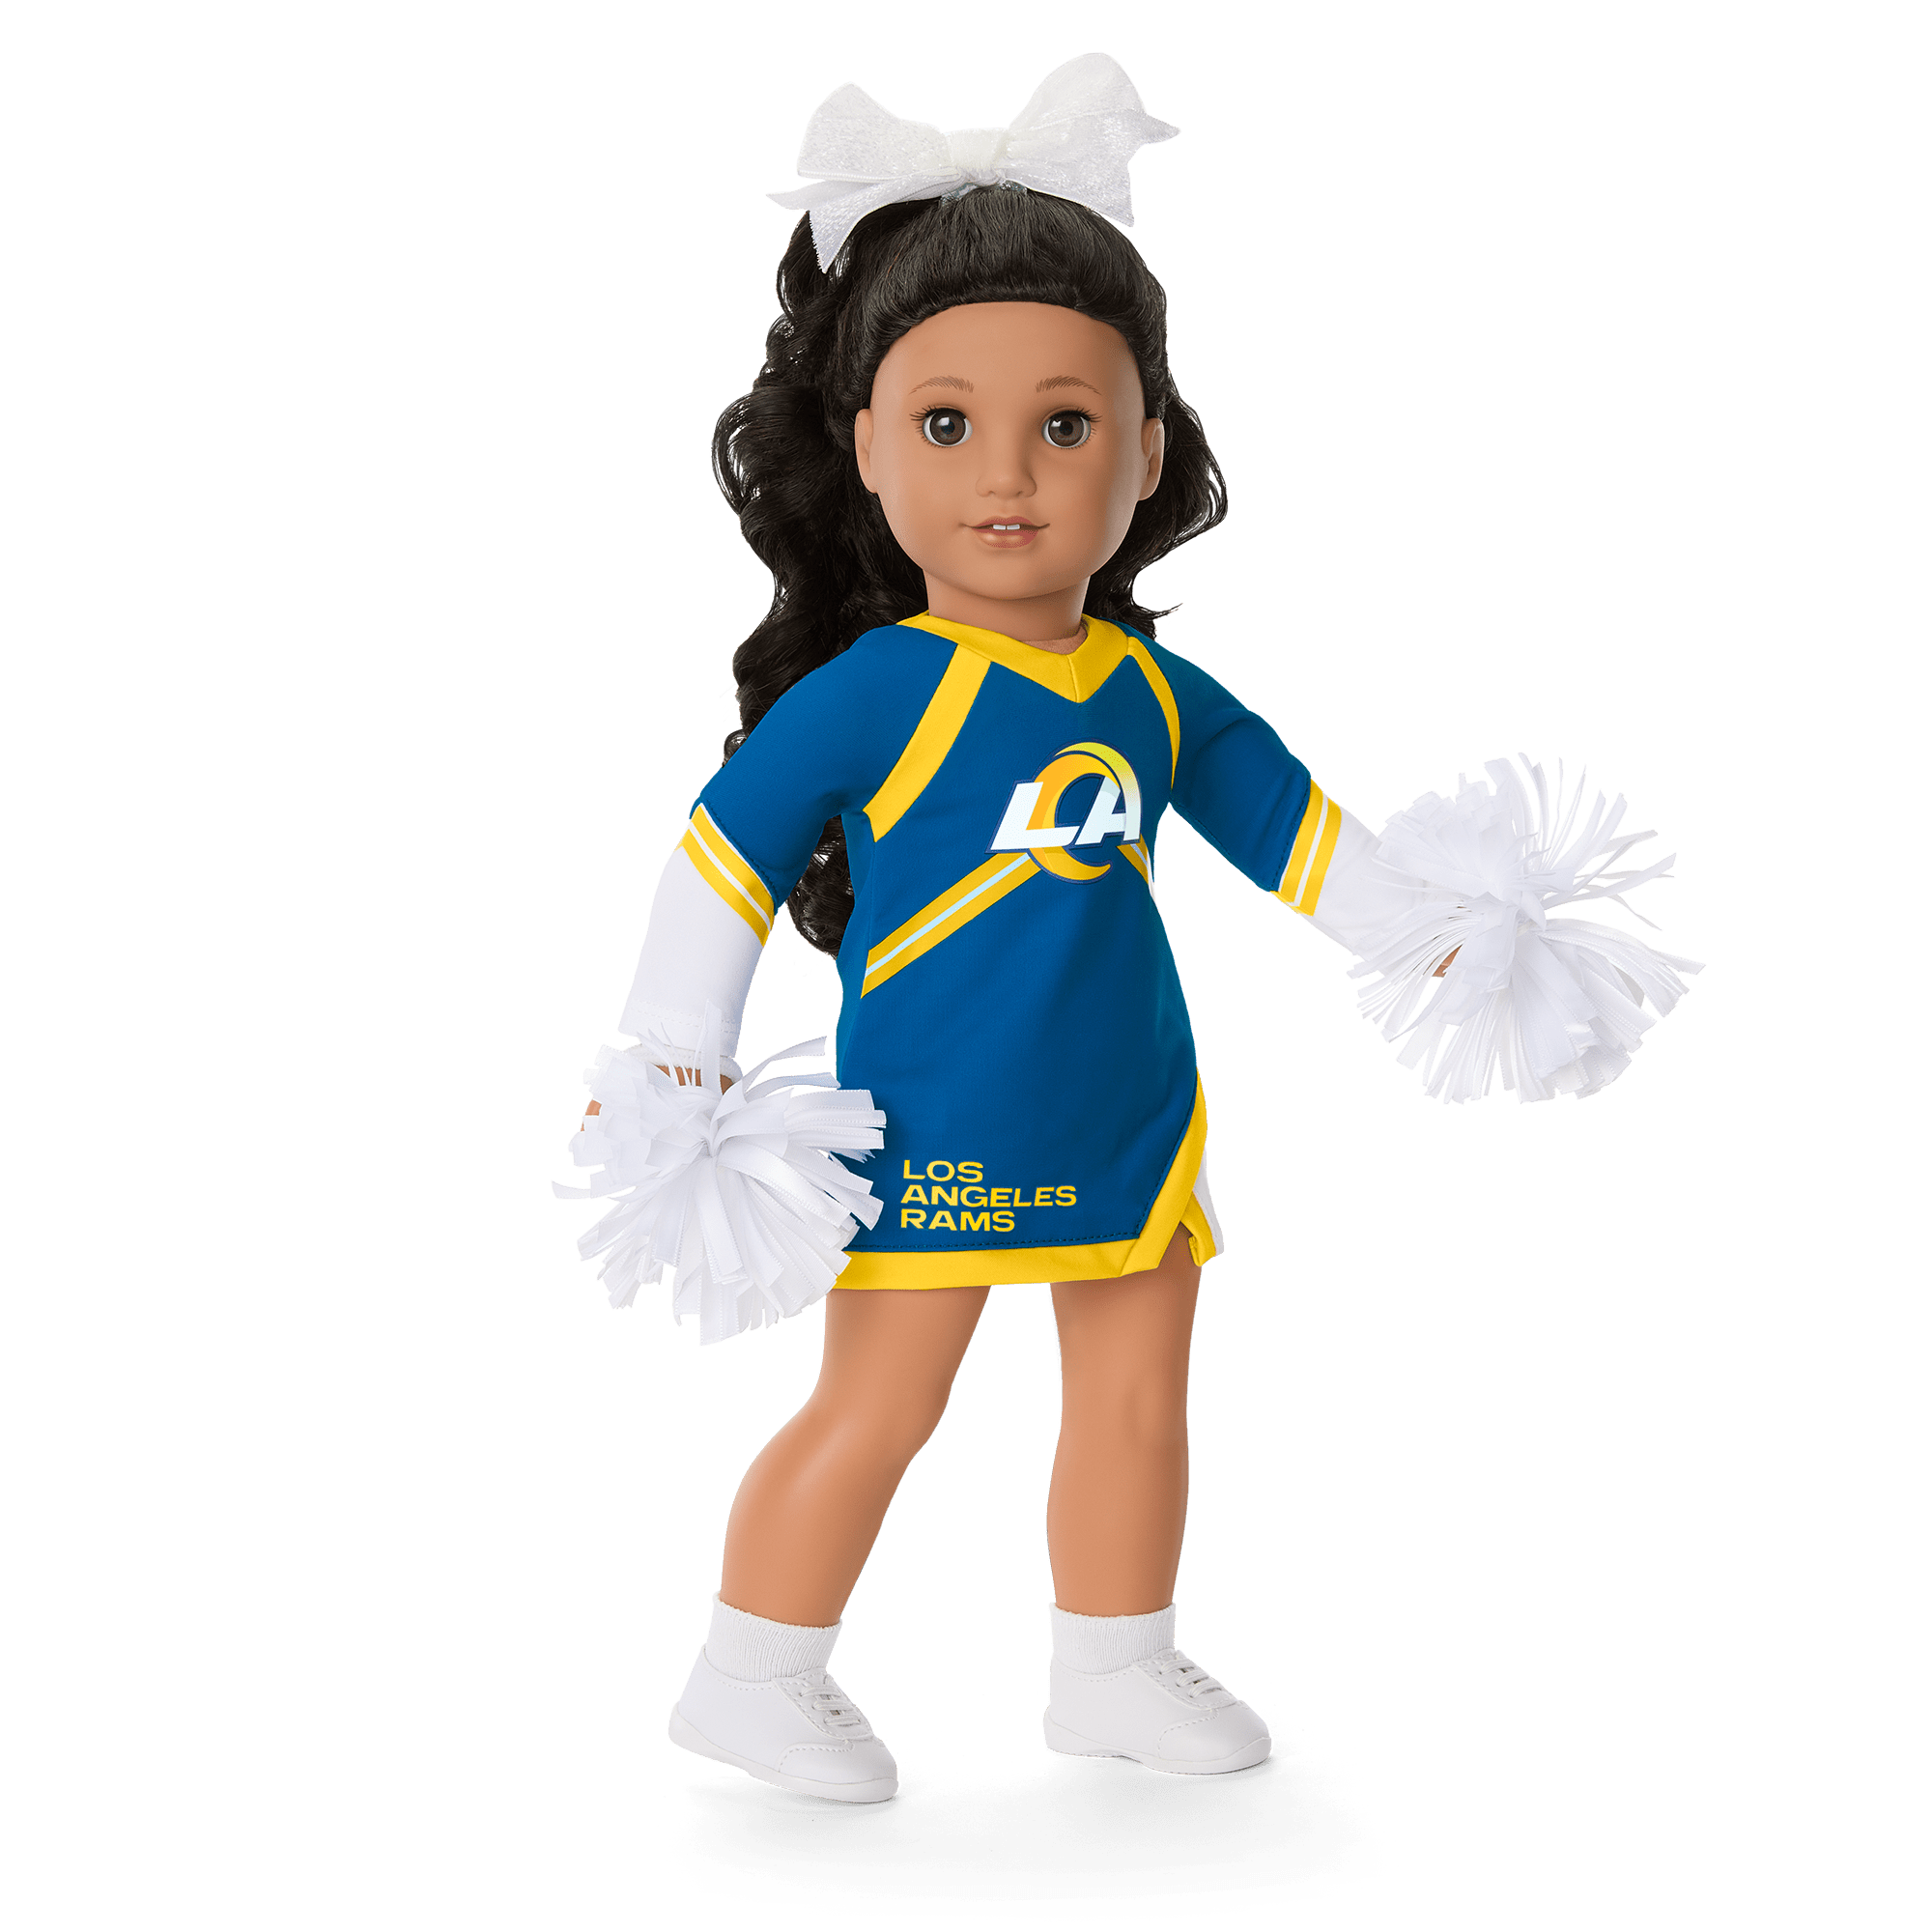 Cheerleader Outfit 18 inch american girl doll - The Doll Boutique